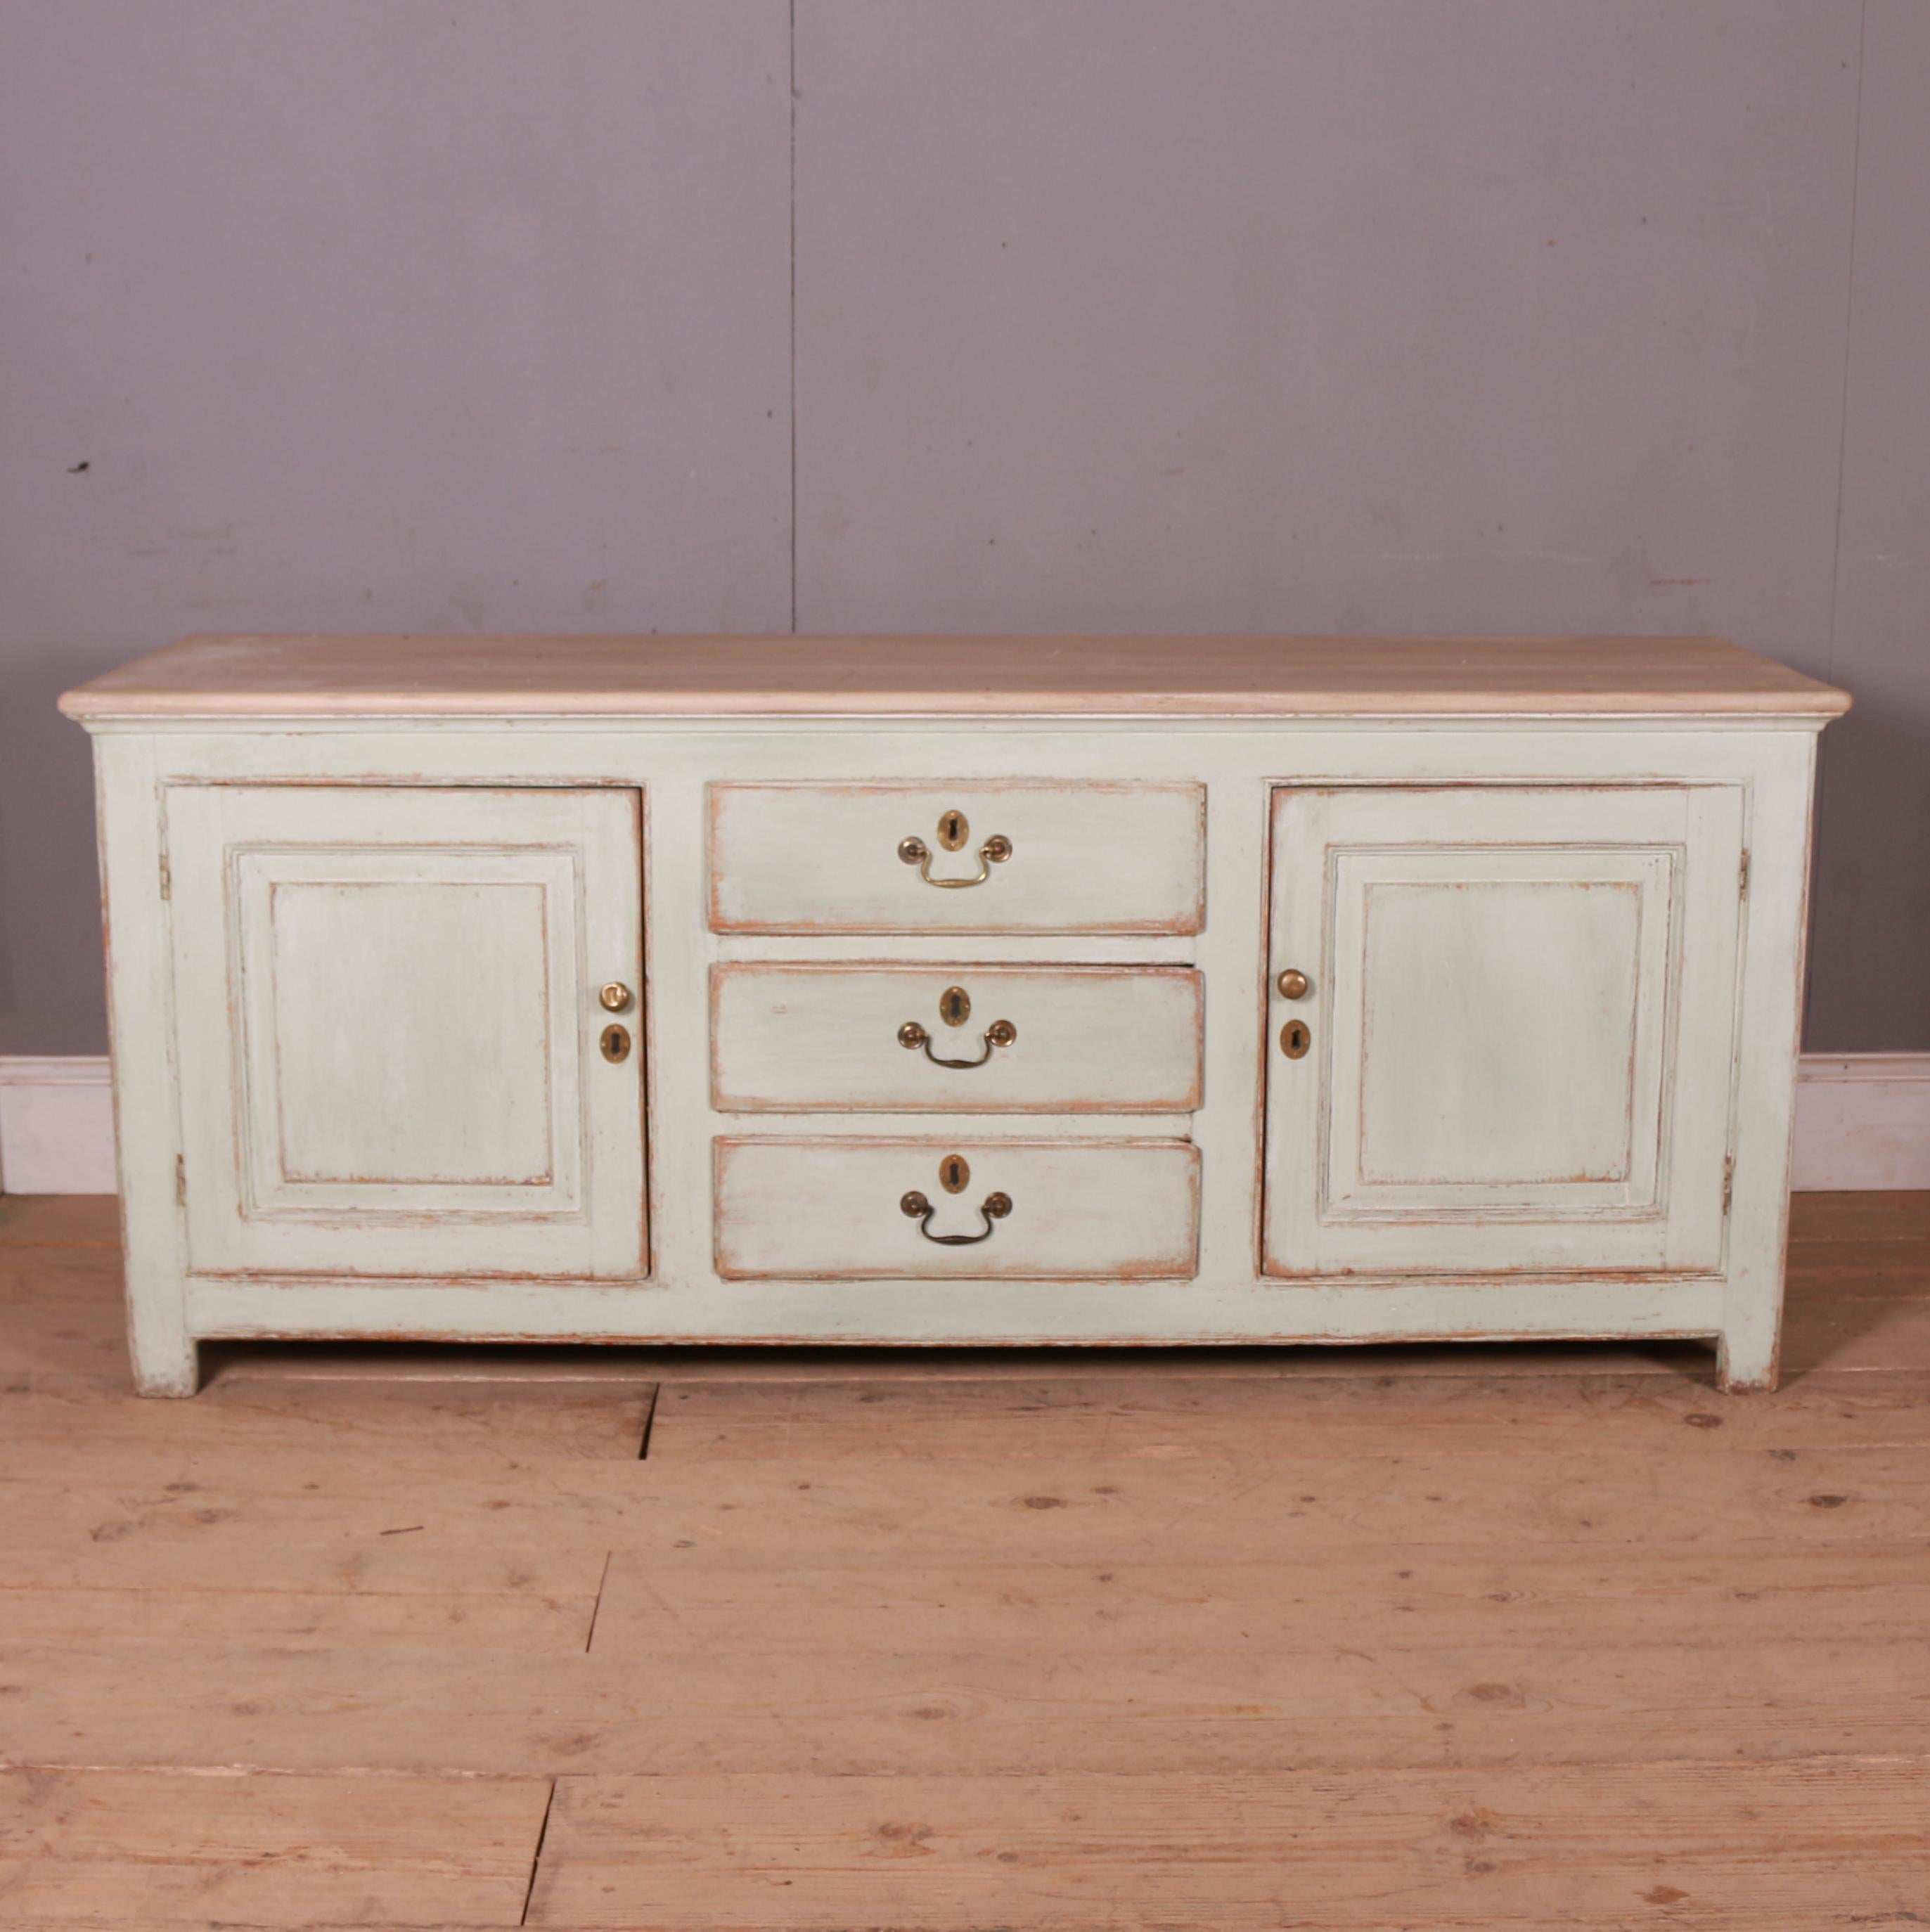 18th C painted English dresser base with a scrubbed and bleached top. 1790.

Reference: 7534

Dimensions
66.5 inches (169 cms) wide
21.5 inches (55 cms) deep
28 inches (71 cms) high.